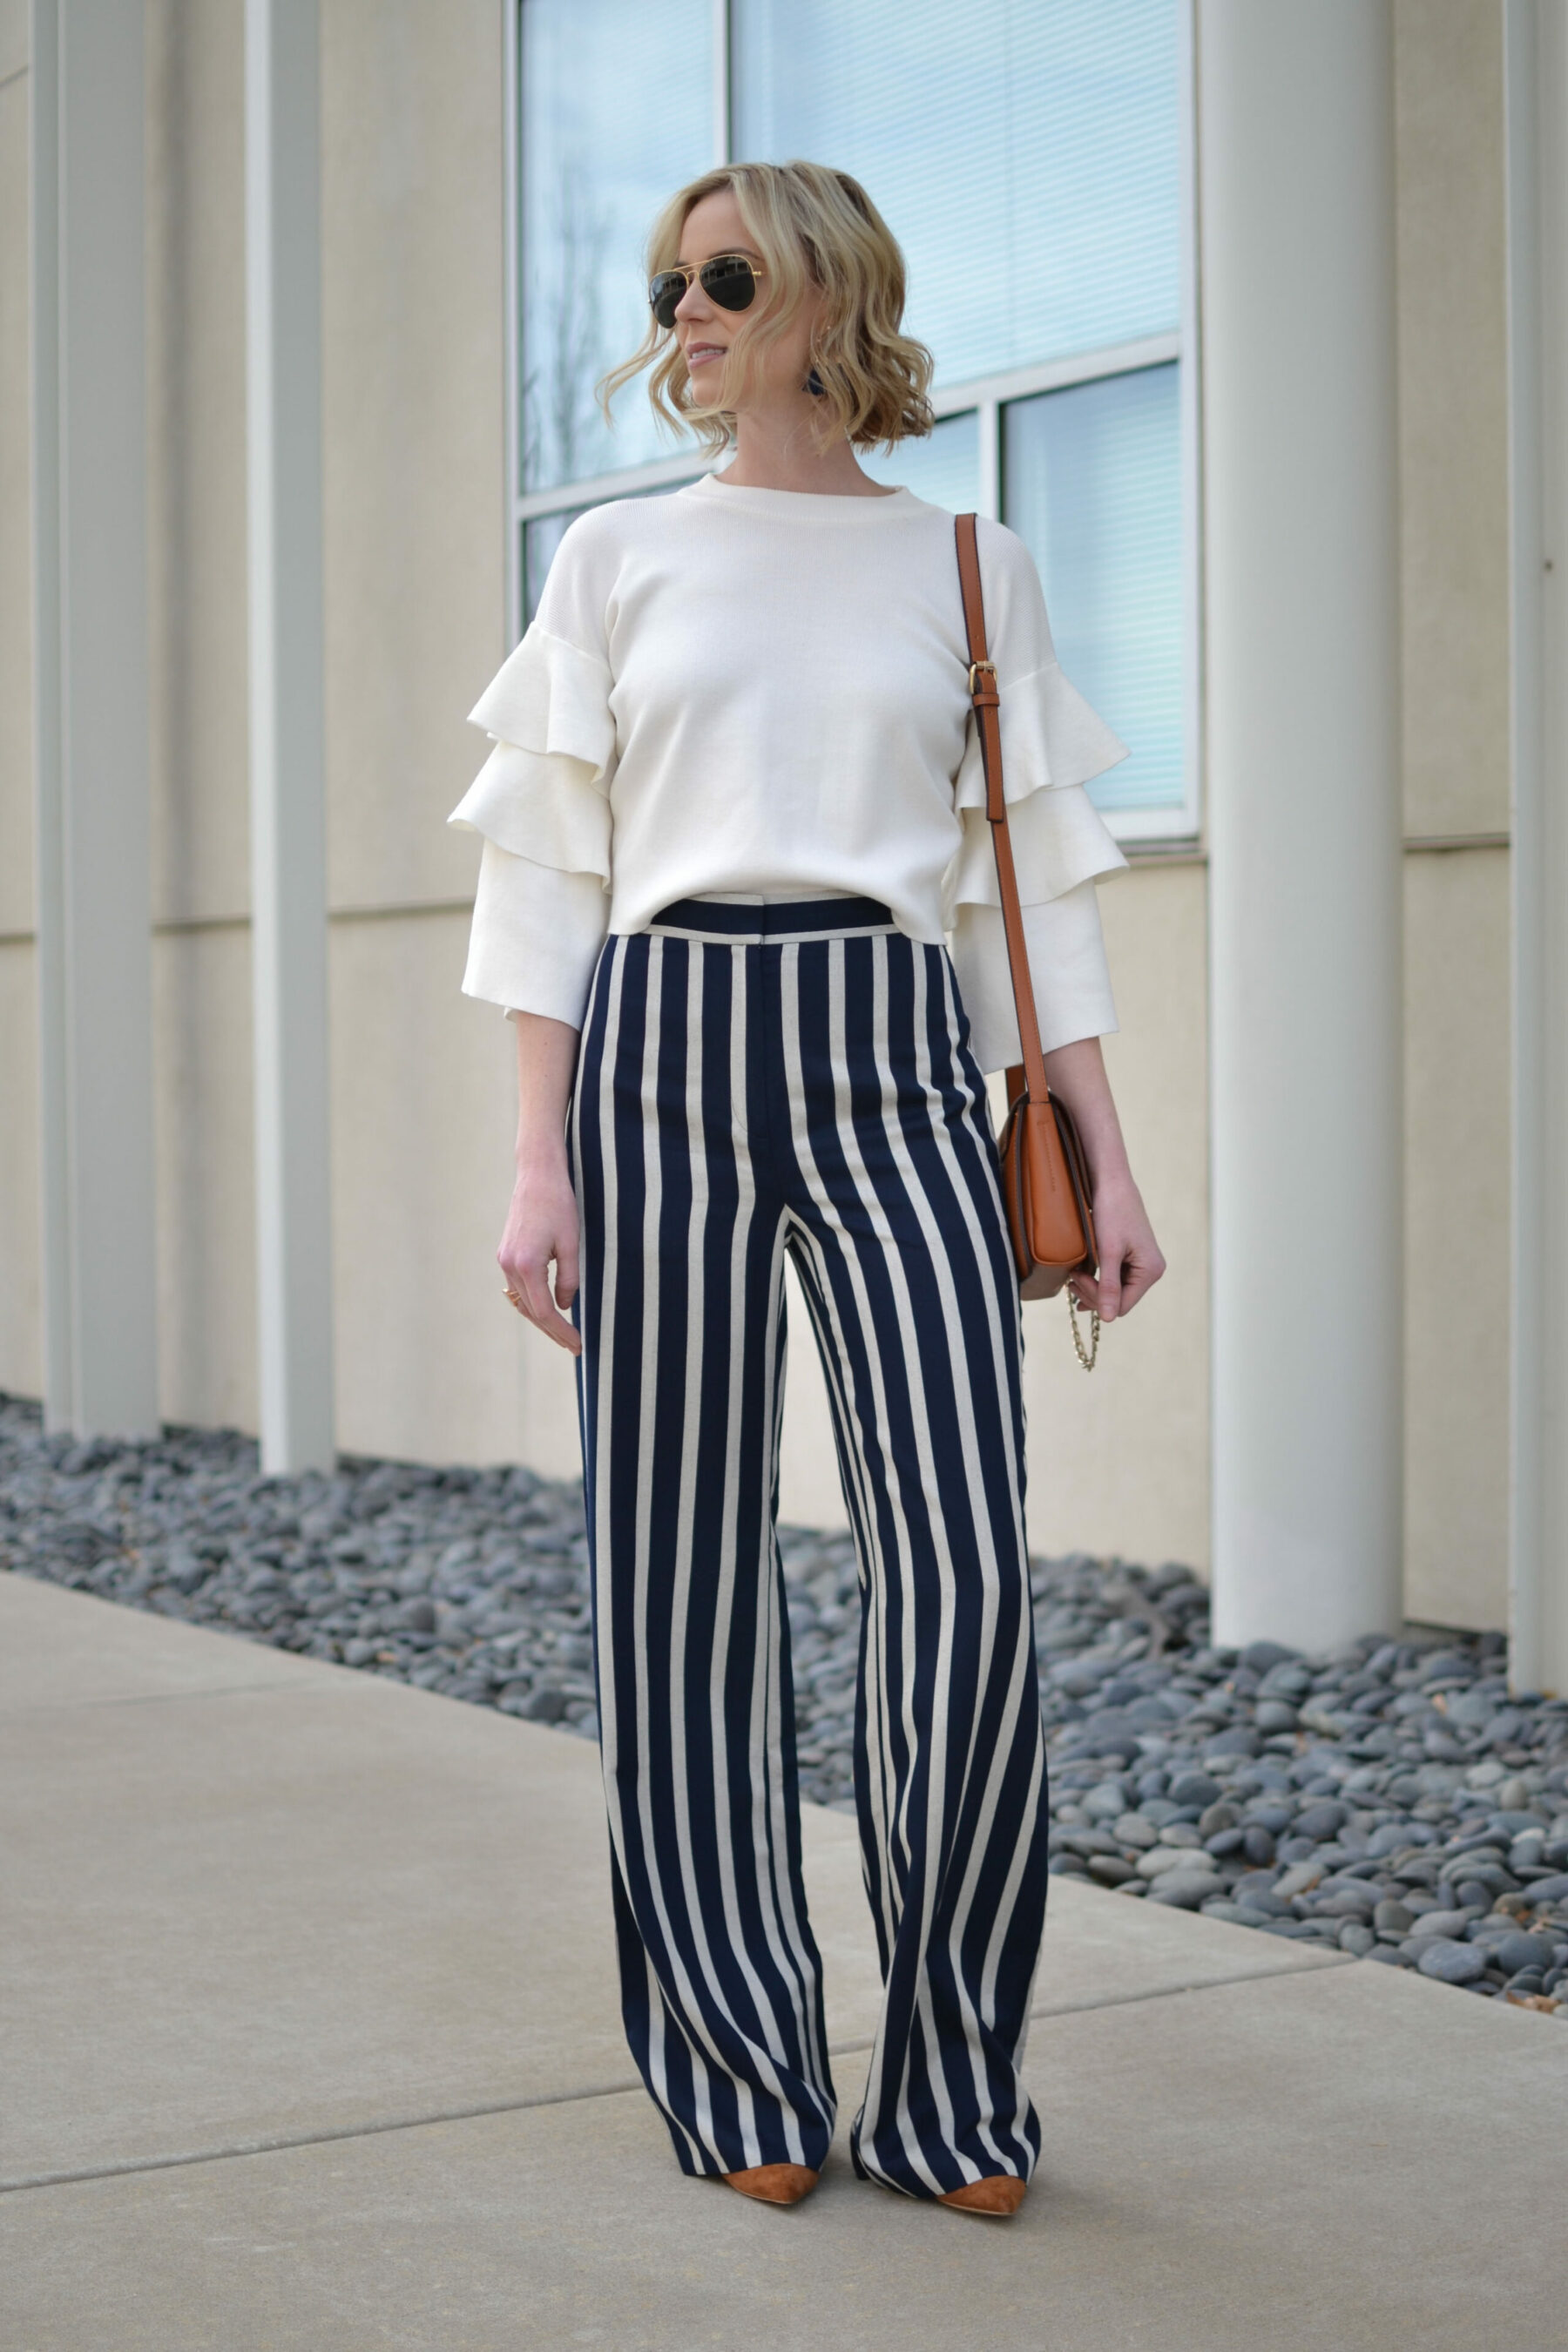 Share more than 74 striped pants look super hot - in.eteachers